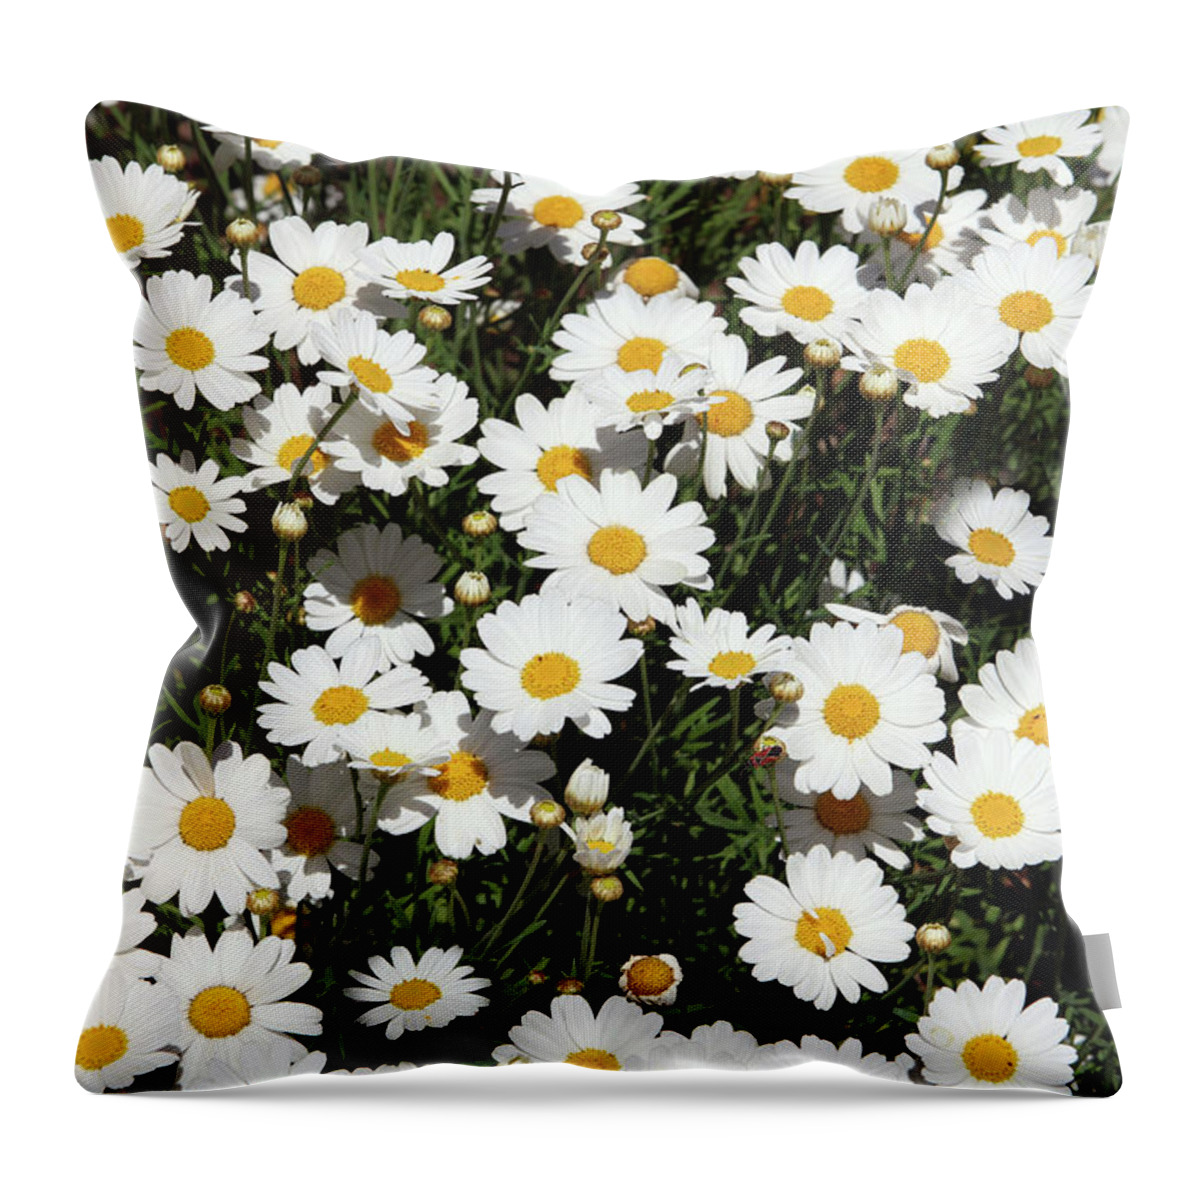 Daisy Throw Pillow featuring the mixed media Happy Daisies- Photography by Linda Woods by Linda Woods